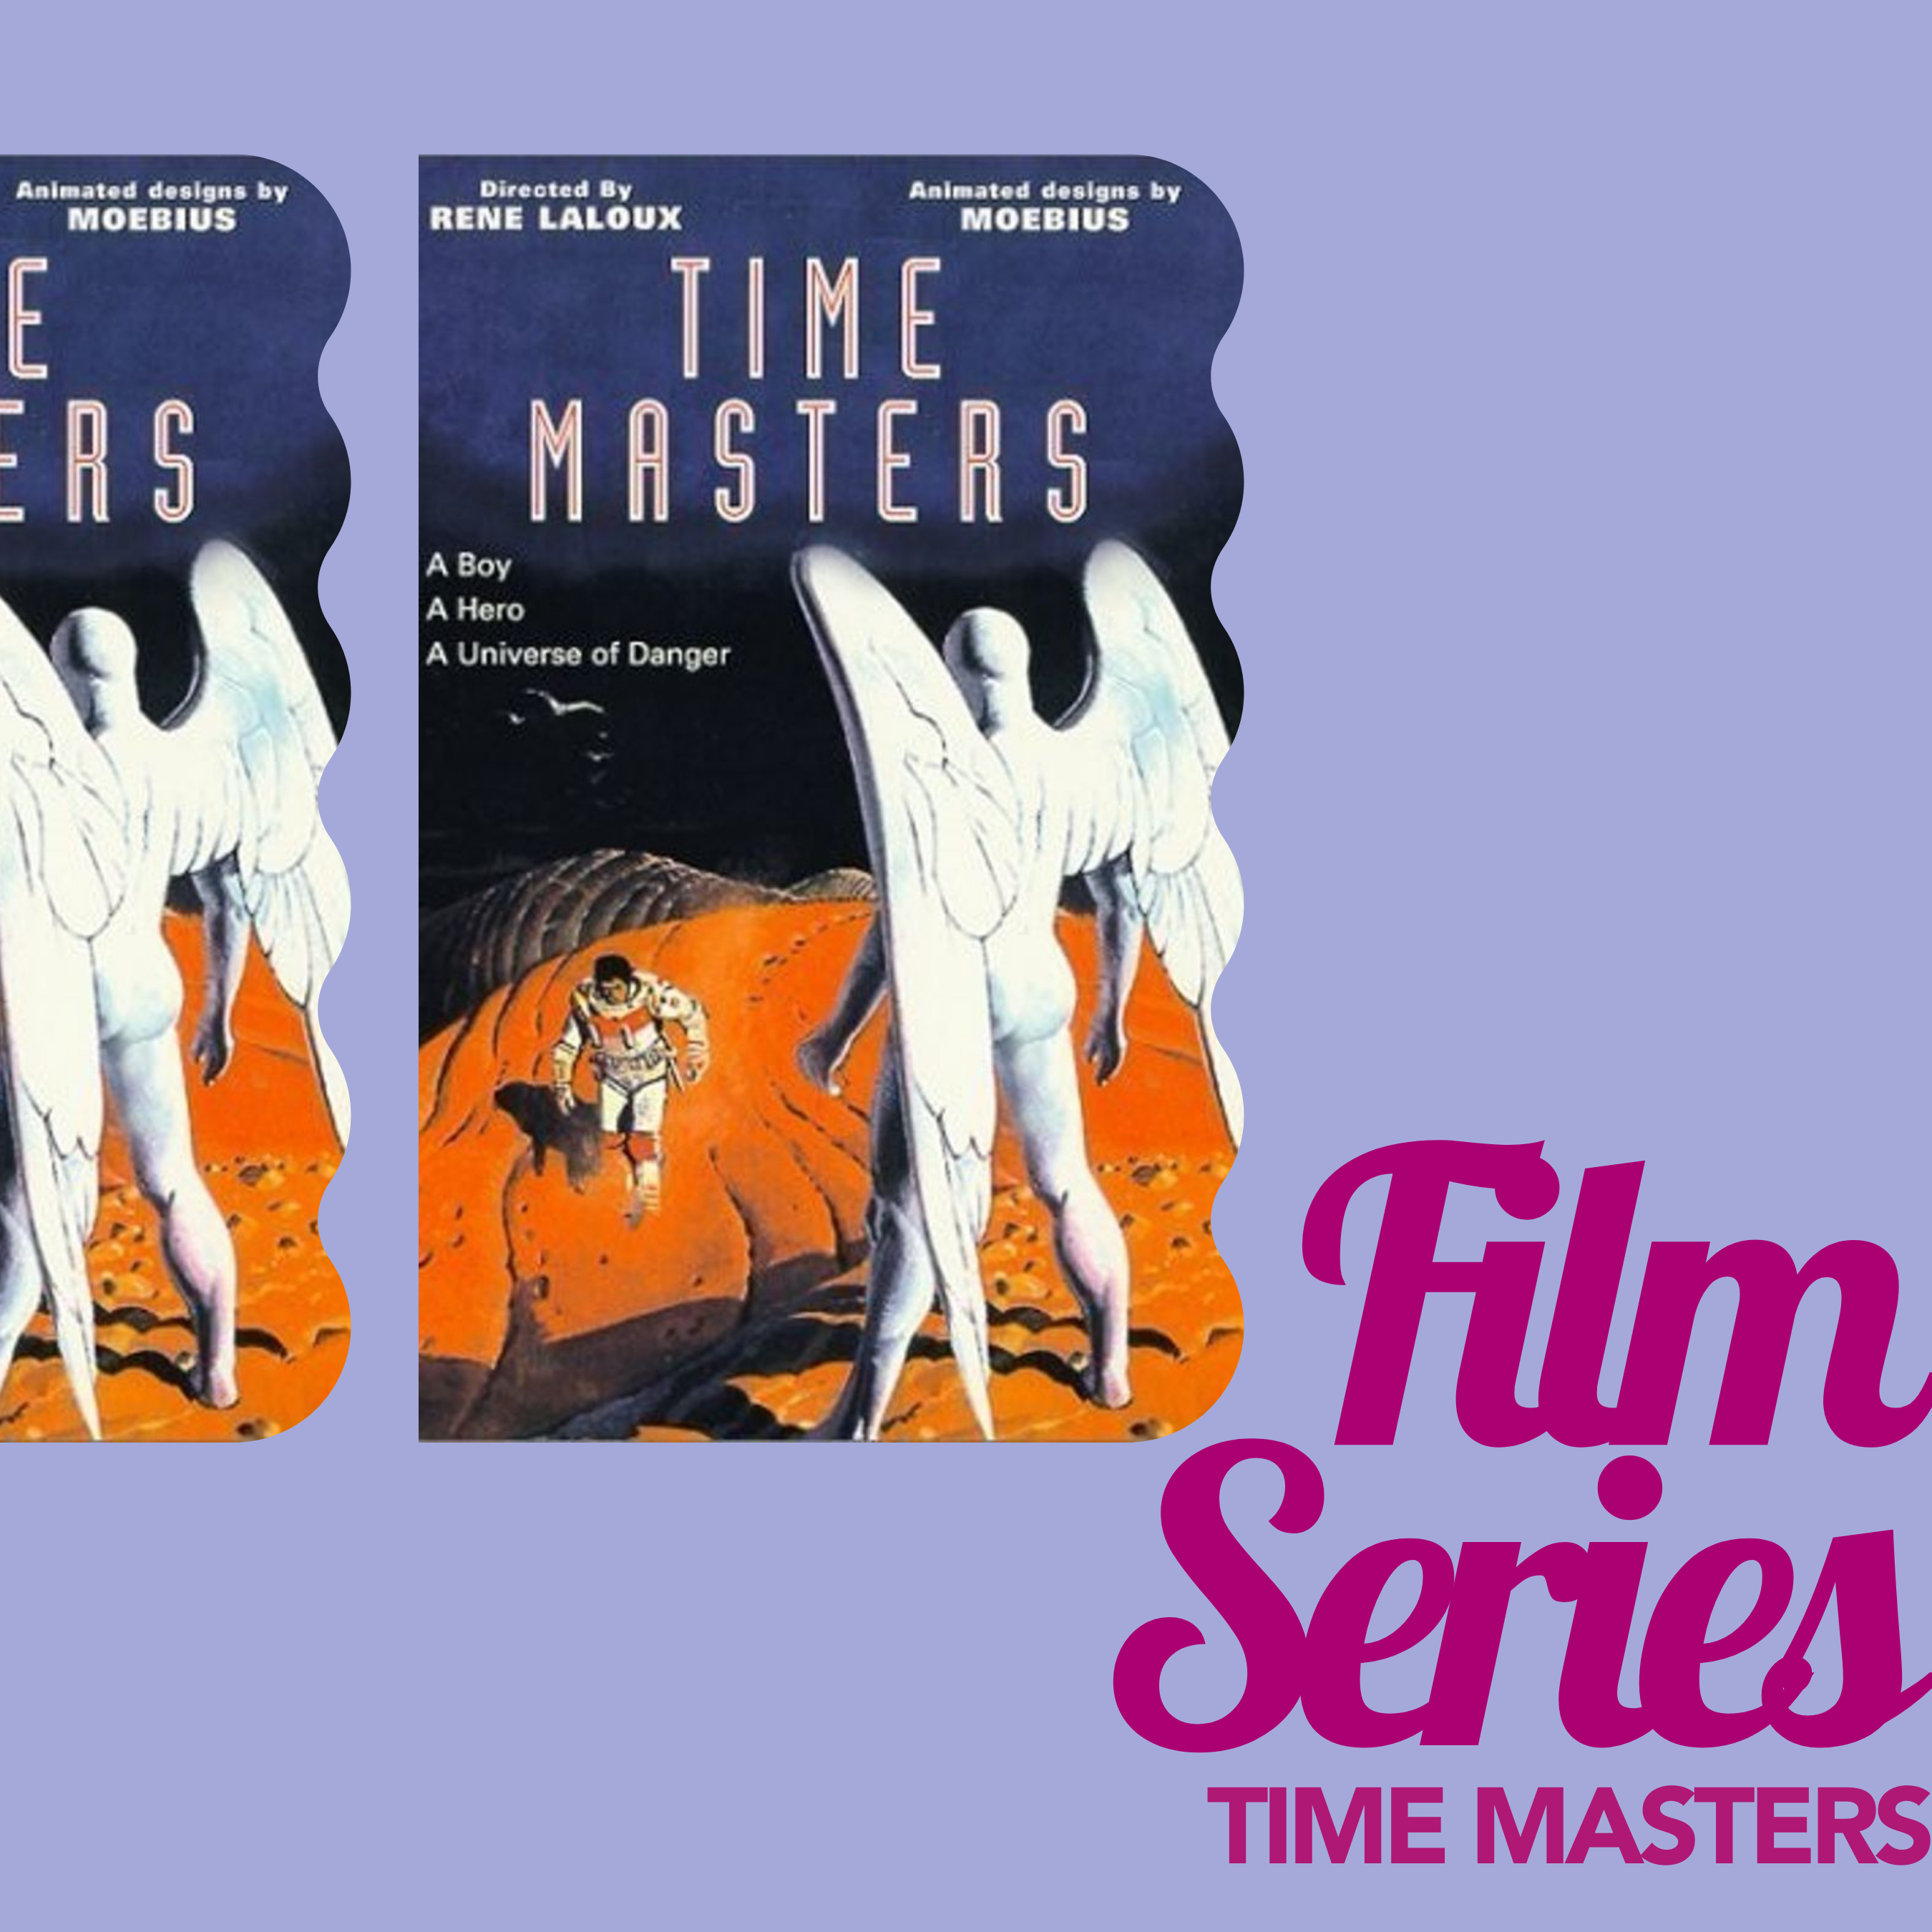 Event art with a lavender background and orchid text that reads, “Film Series” and “Time Masters” on the bottom right. On the graphic, there are two images of the same film poster featuring an otherworldly scene of what looks like a white figure with wings watching another figure, clad in a space suit, climbing up an orange planet. 